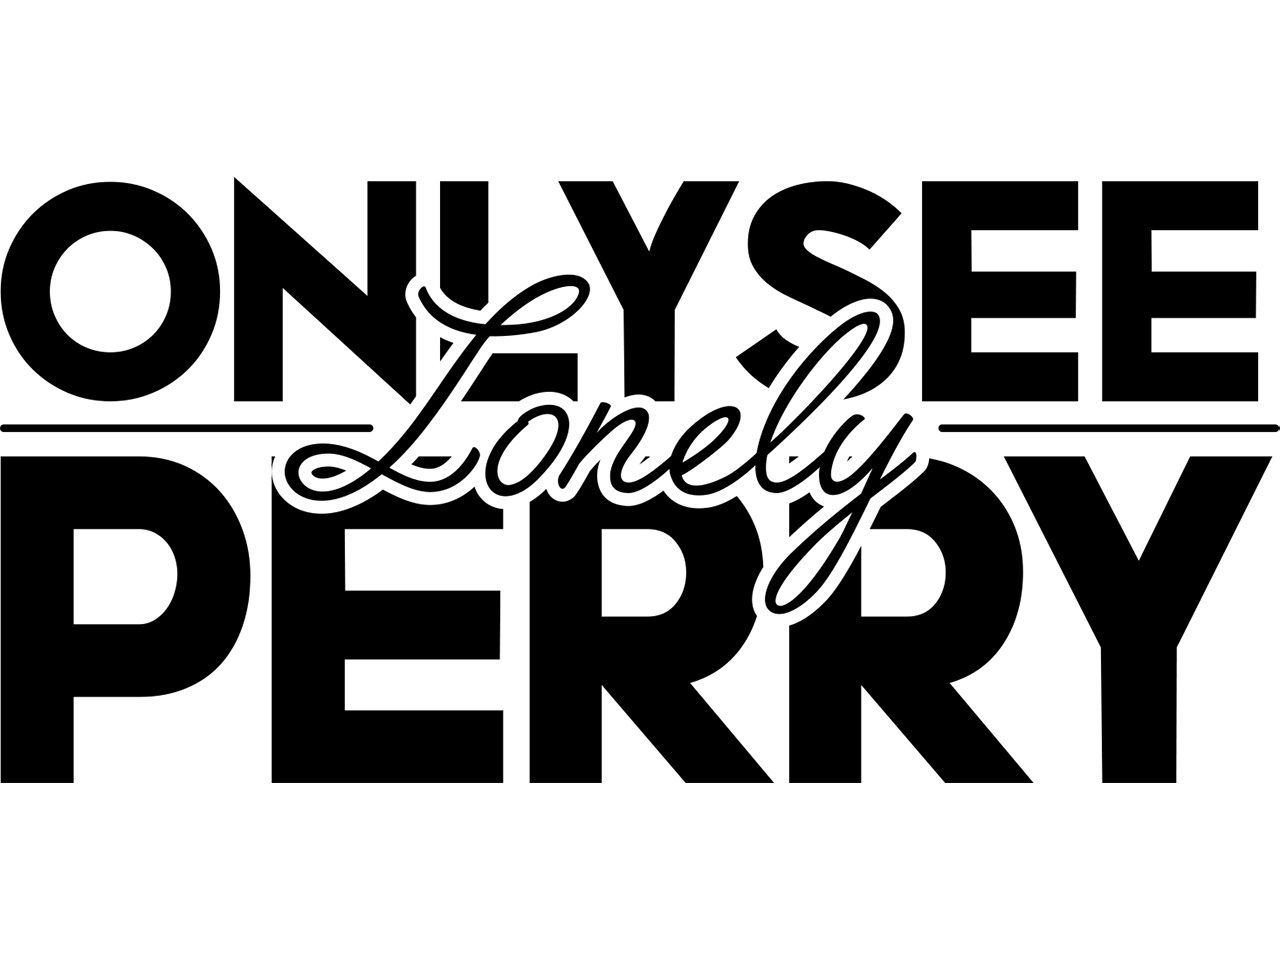 OnlySee LonelyPerry